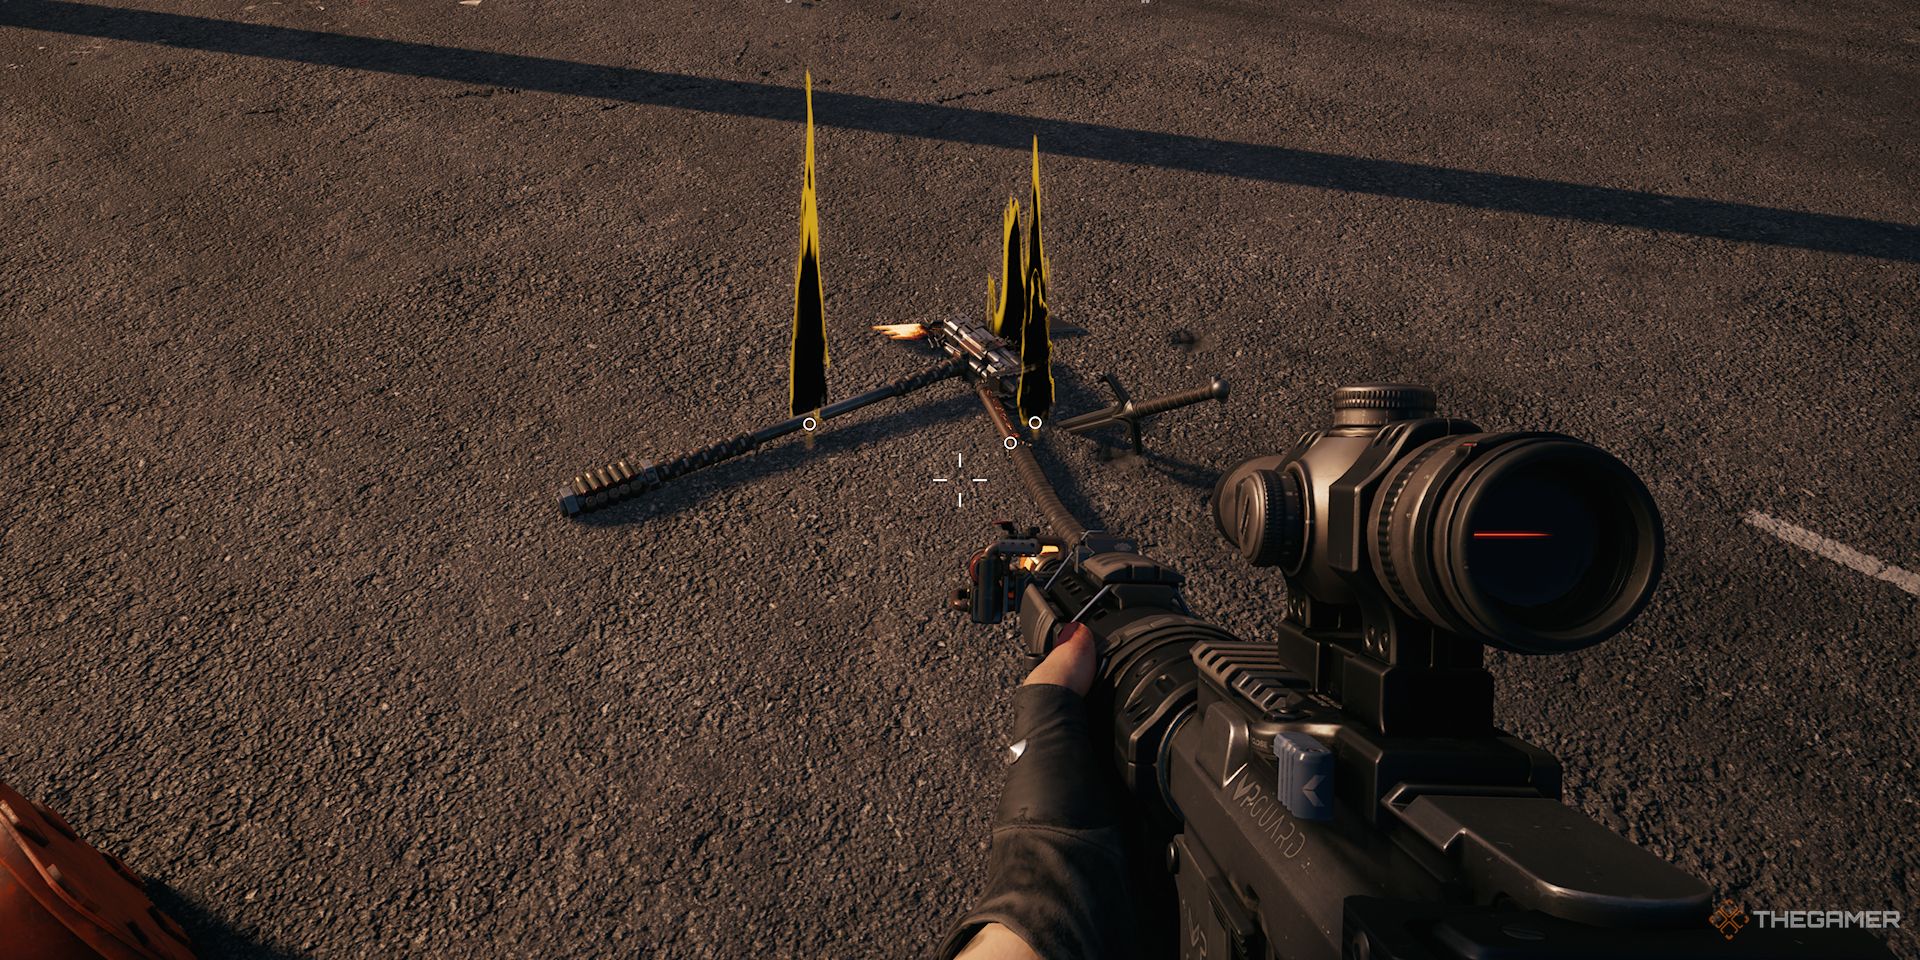 Image has multiple weapons on the ground